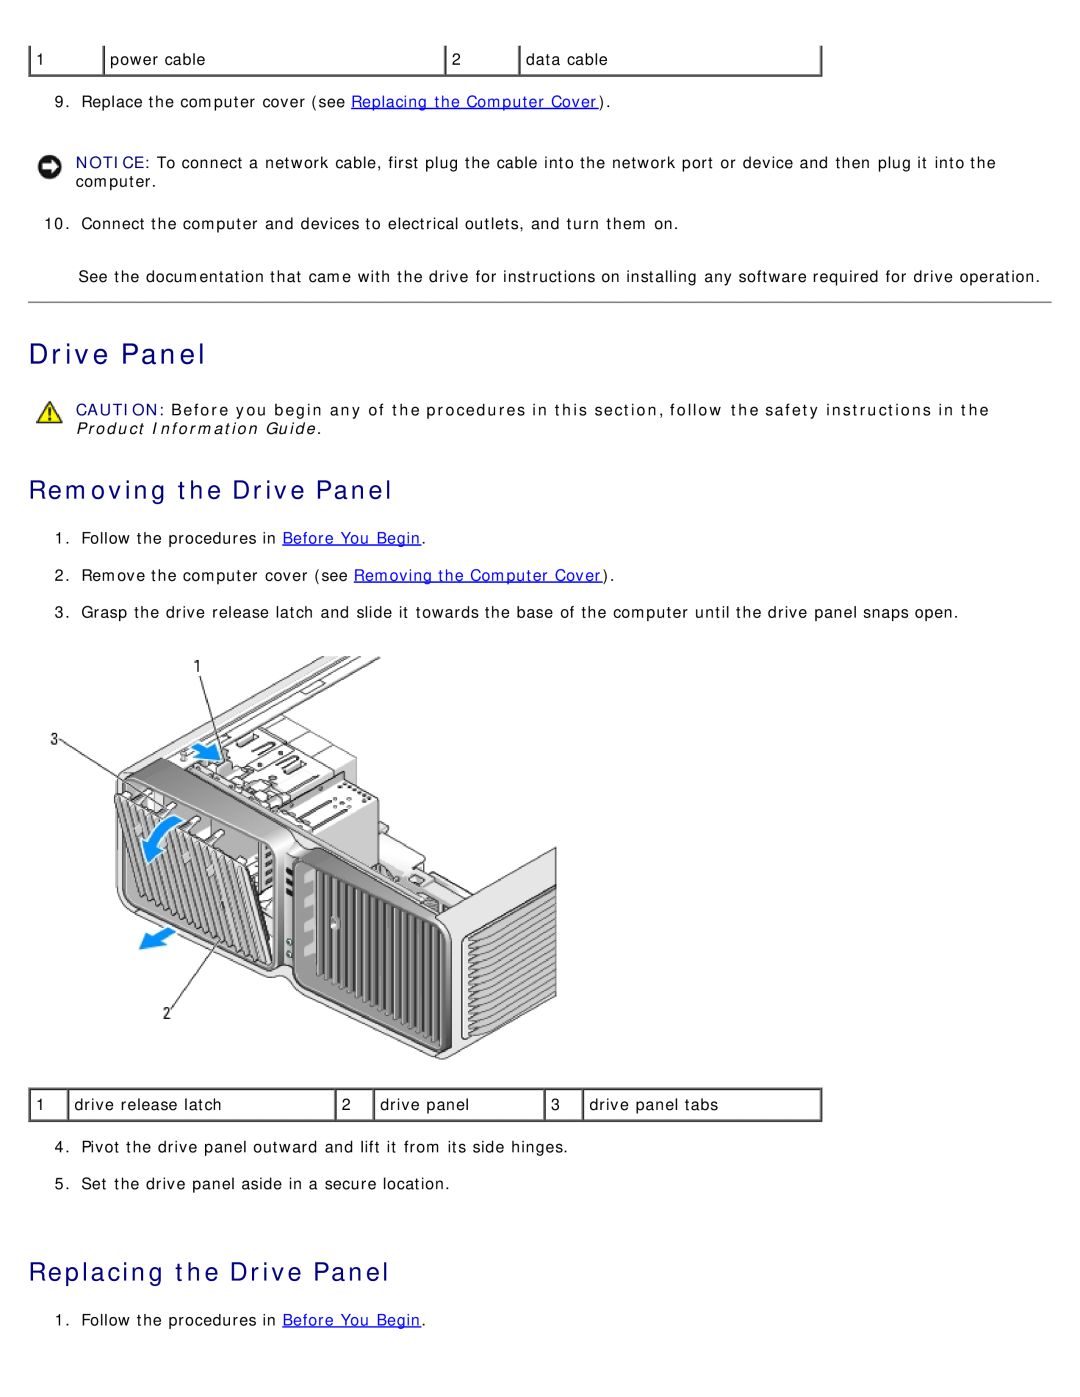 Dell 710 H2C, DCDO service manual Removing the Drive Panel, Replacing the Drive Panel 